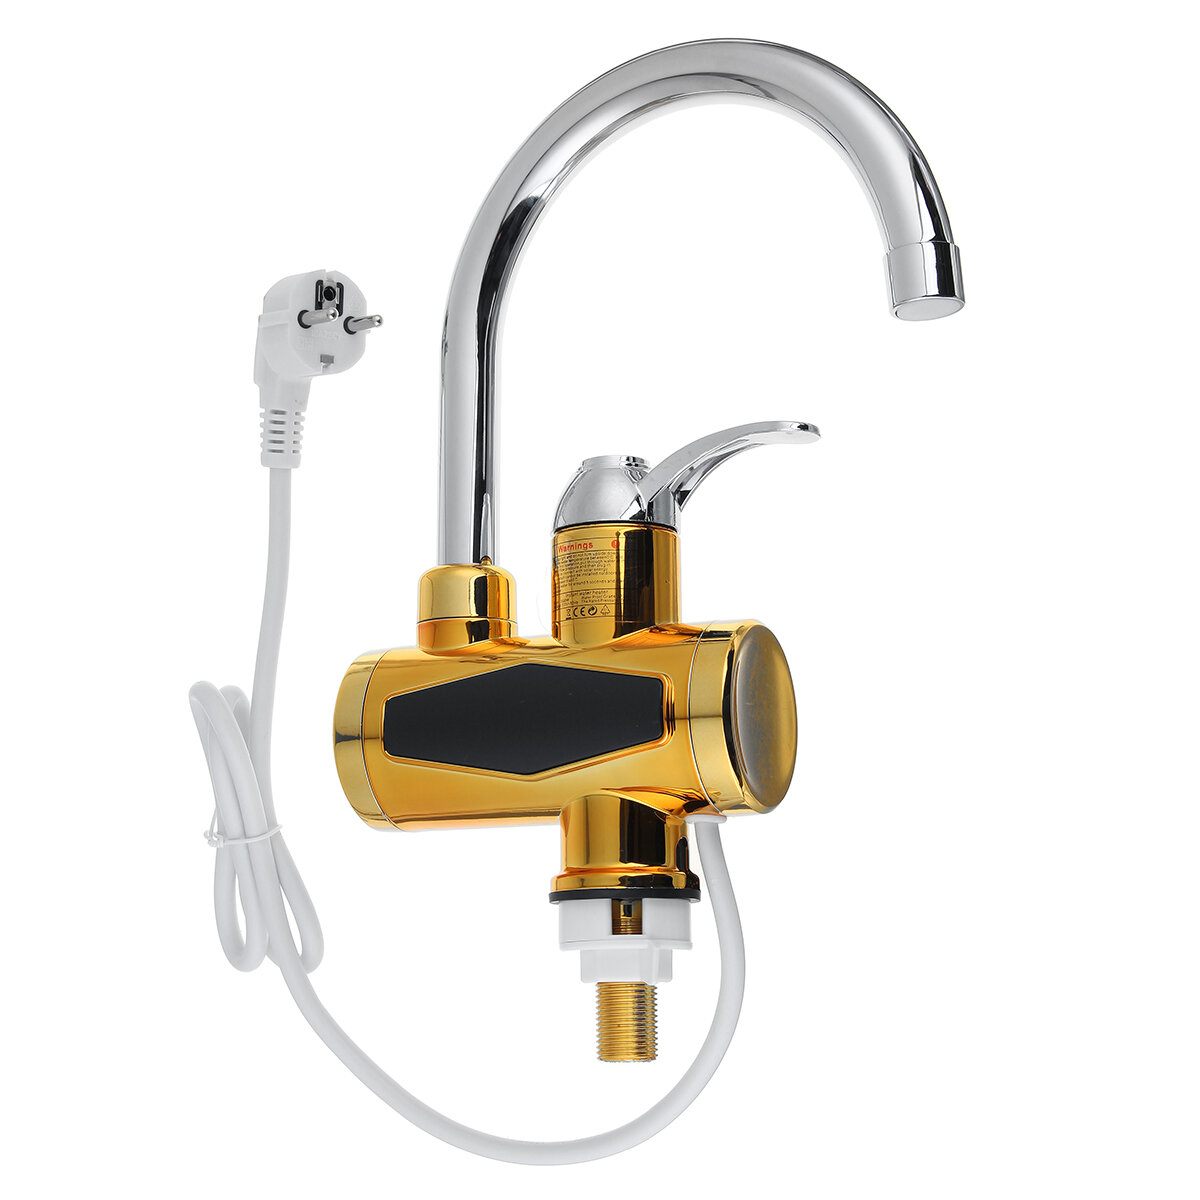 

Bakeey 3000W Electric Heating Faucet 3S Heating Temperature Display Instant Hot Water Tap Faucet